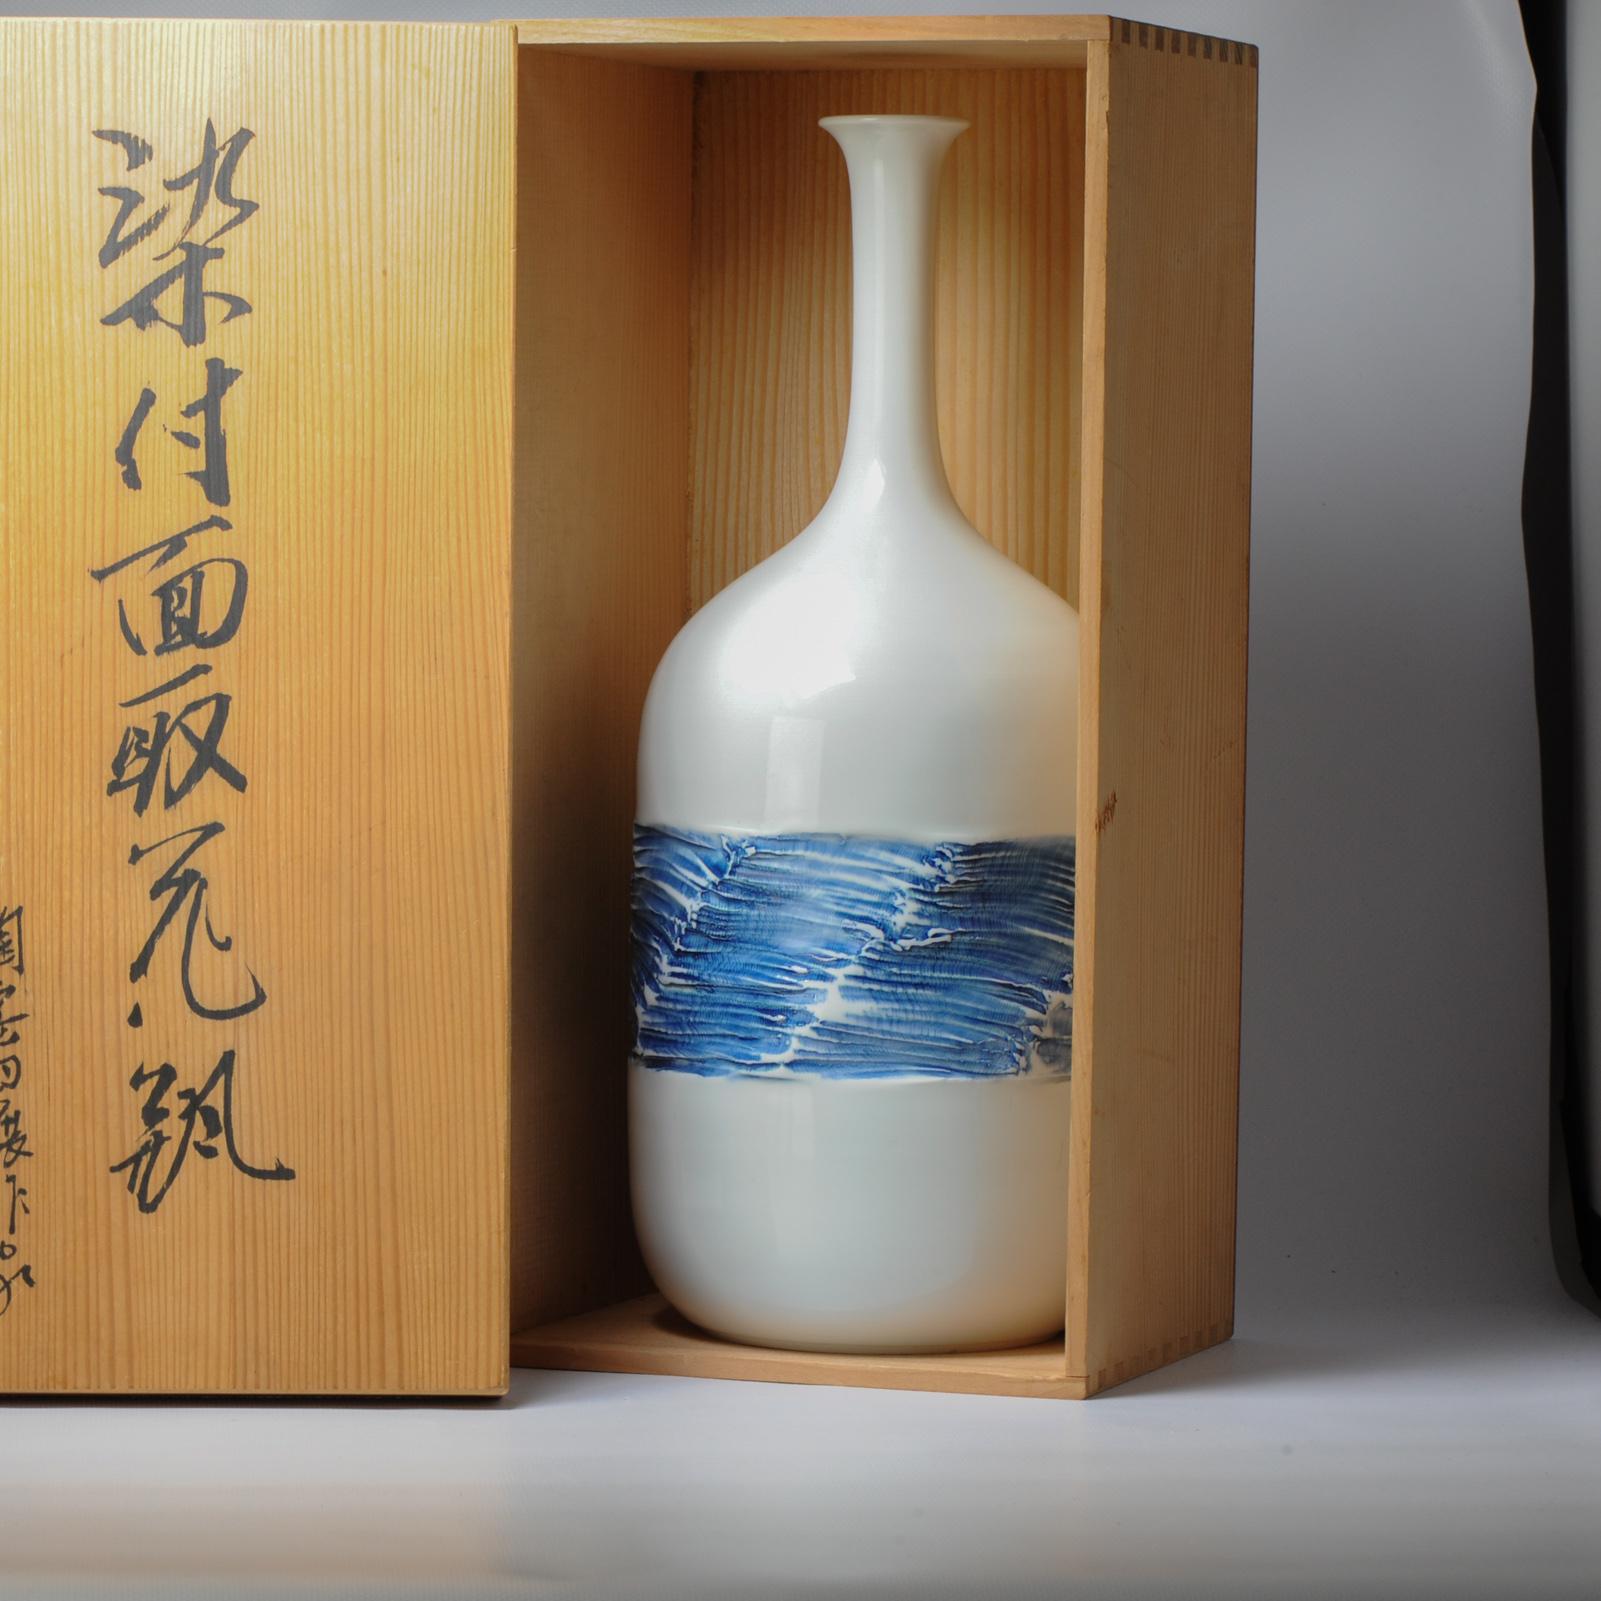 Fine Art Japanese Vase Arita, Artist Fujii Shumei a Wrinkled Vase Shumei In Good Condition For Sale In Amsterdam, Noord Holland